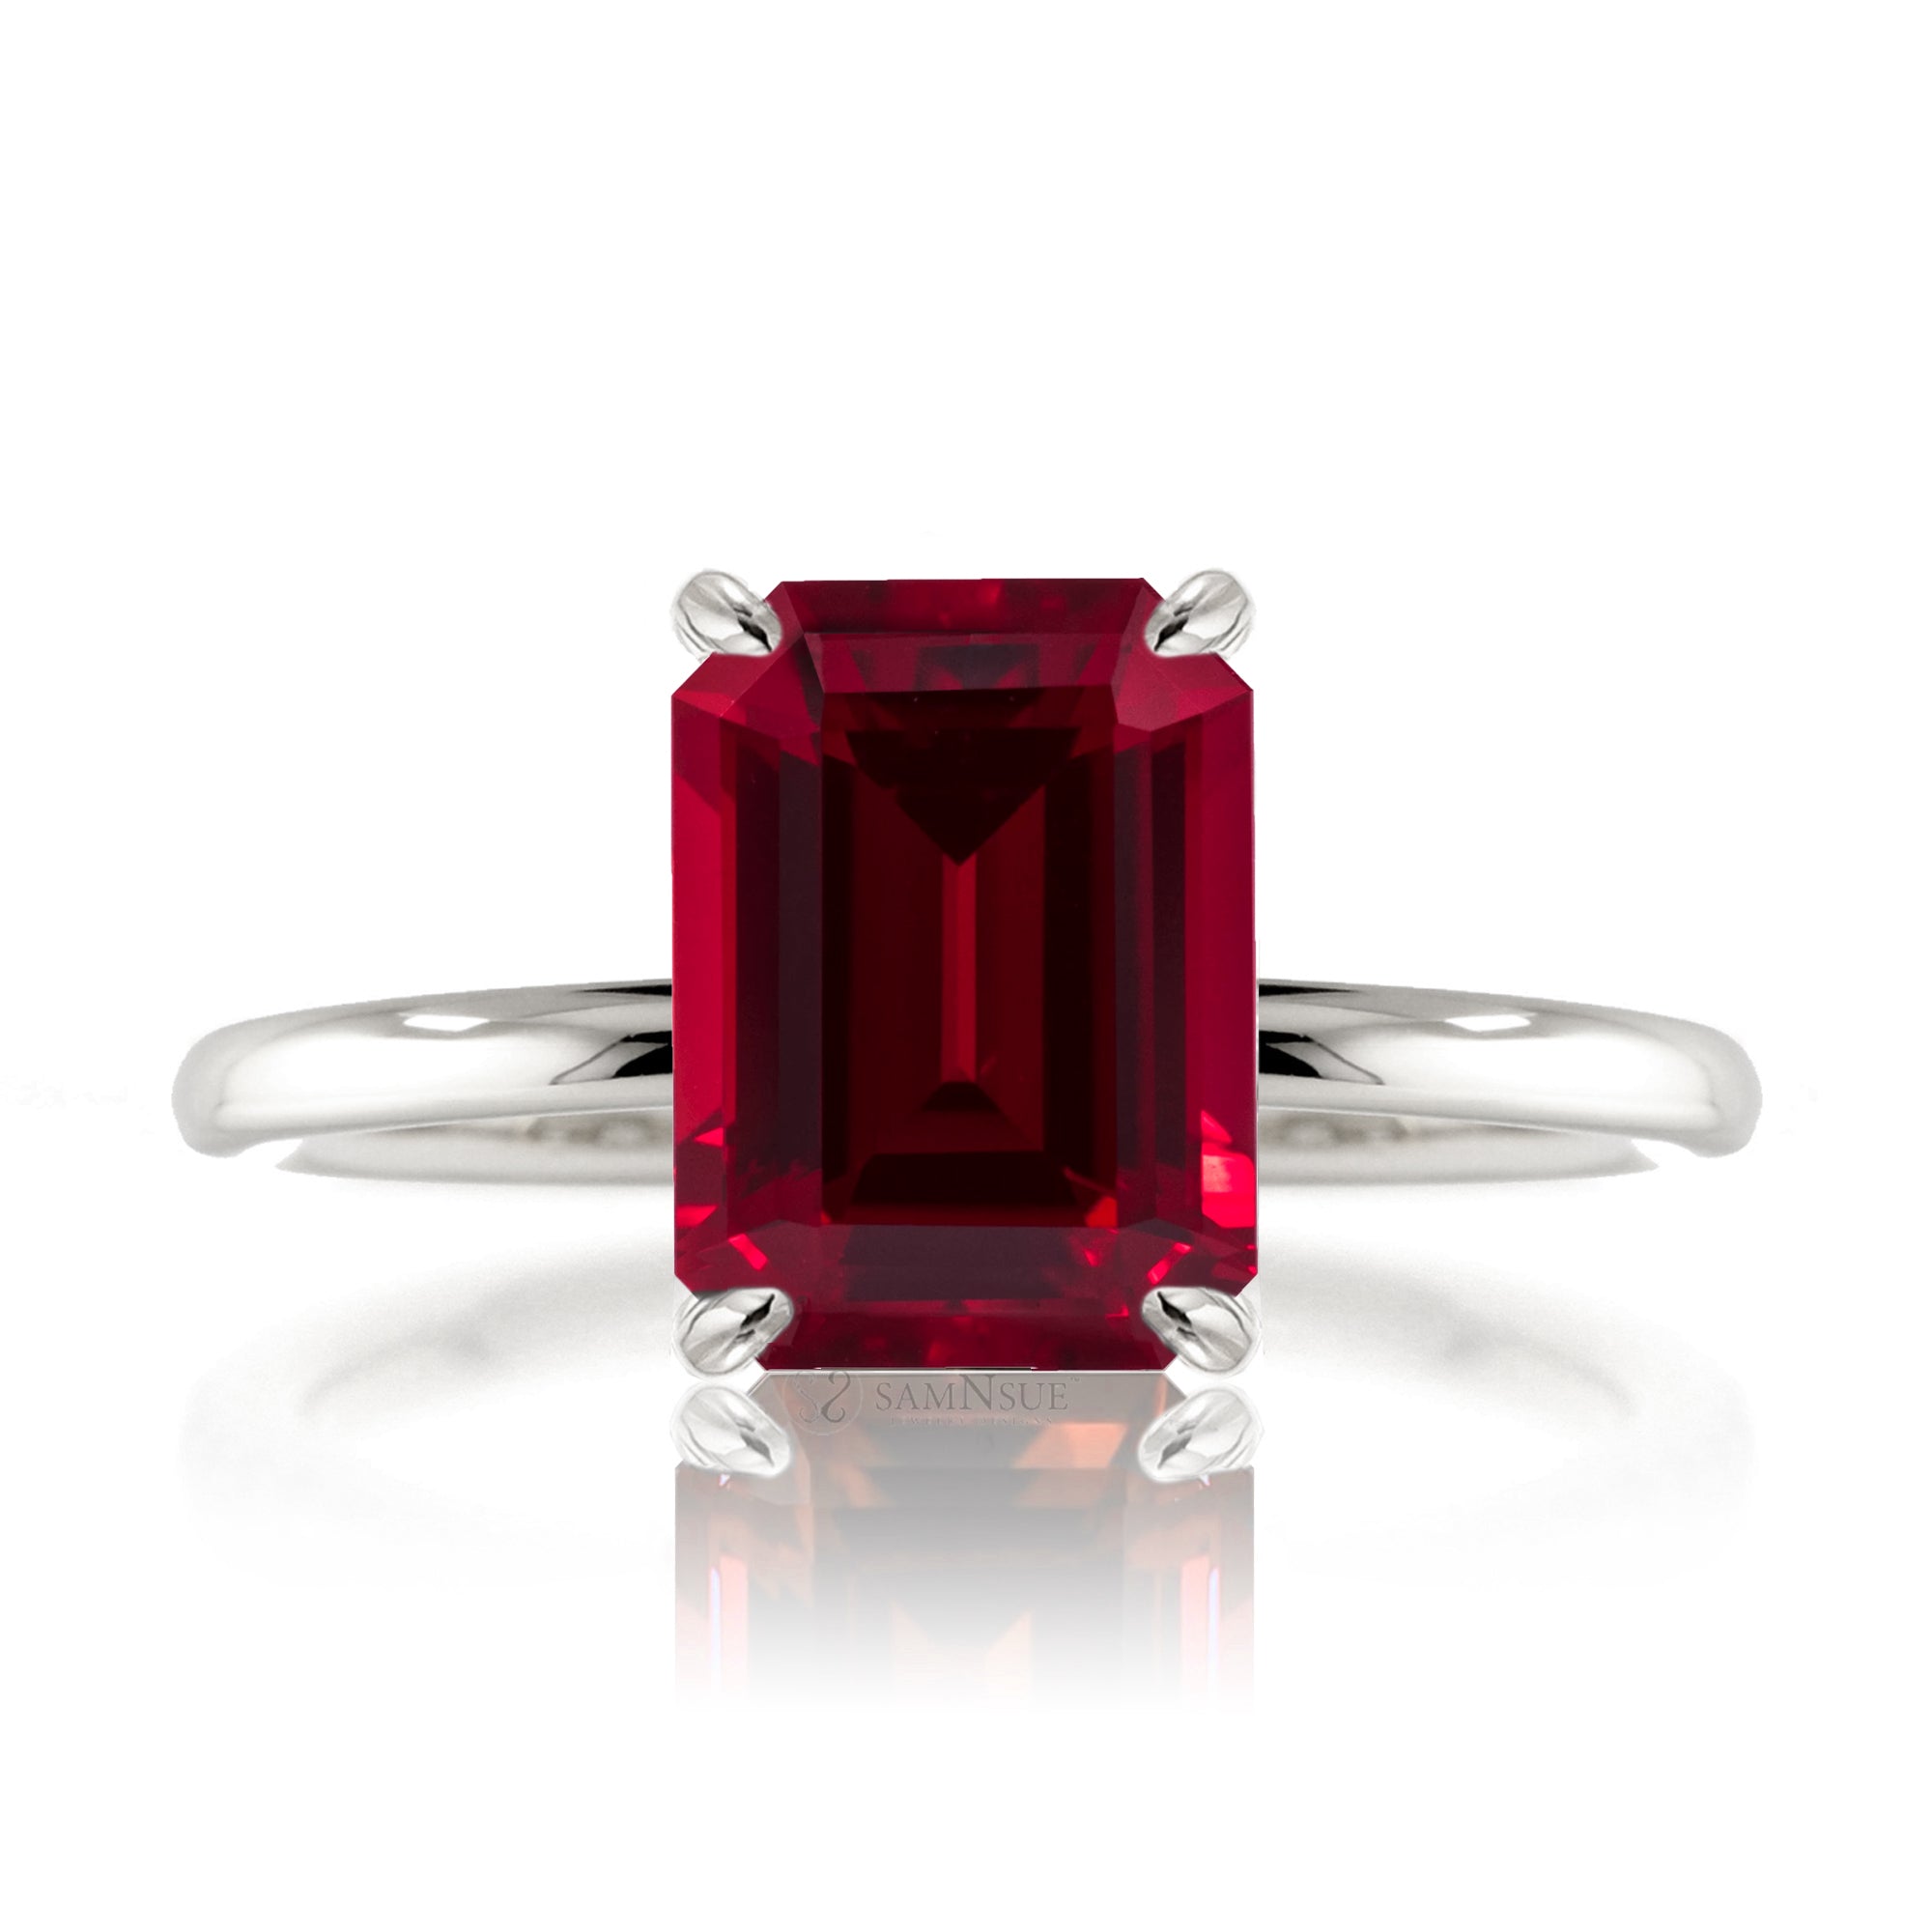 Emerald cut ruby diamond engagement ring white gold - the Ava